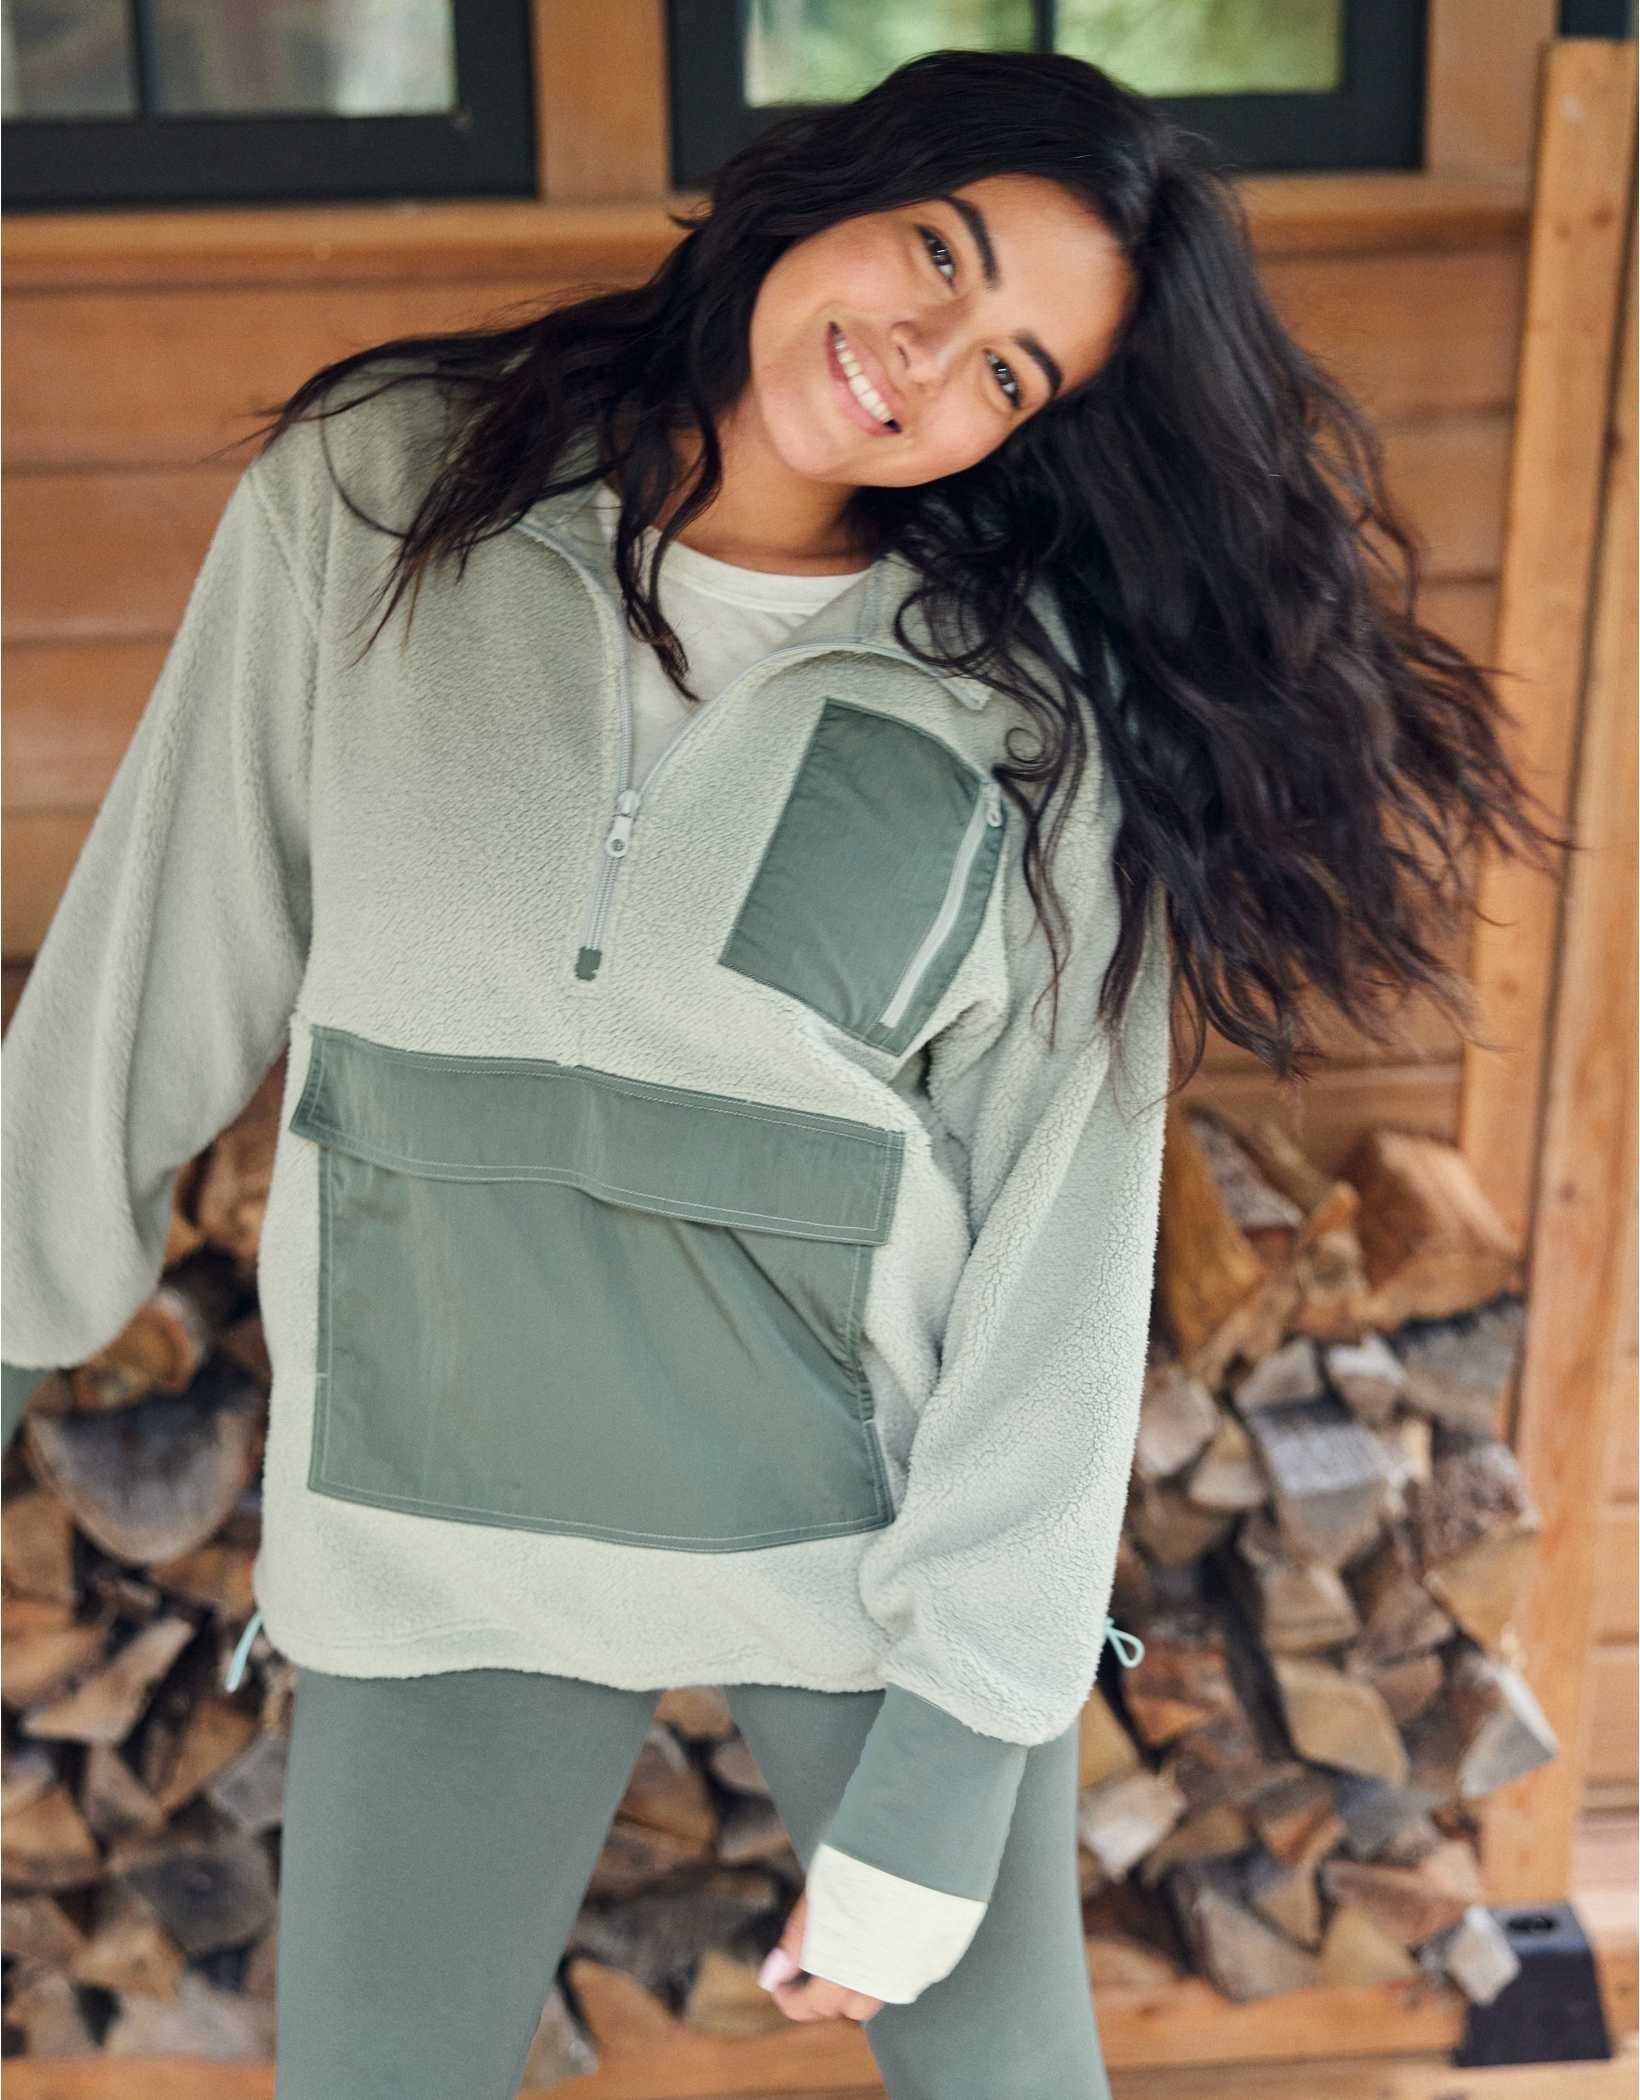 model wearing the green fuzzy jacket with dark green pockets